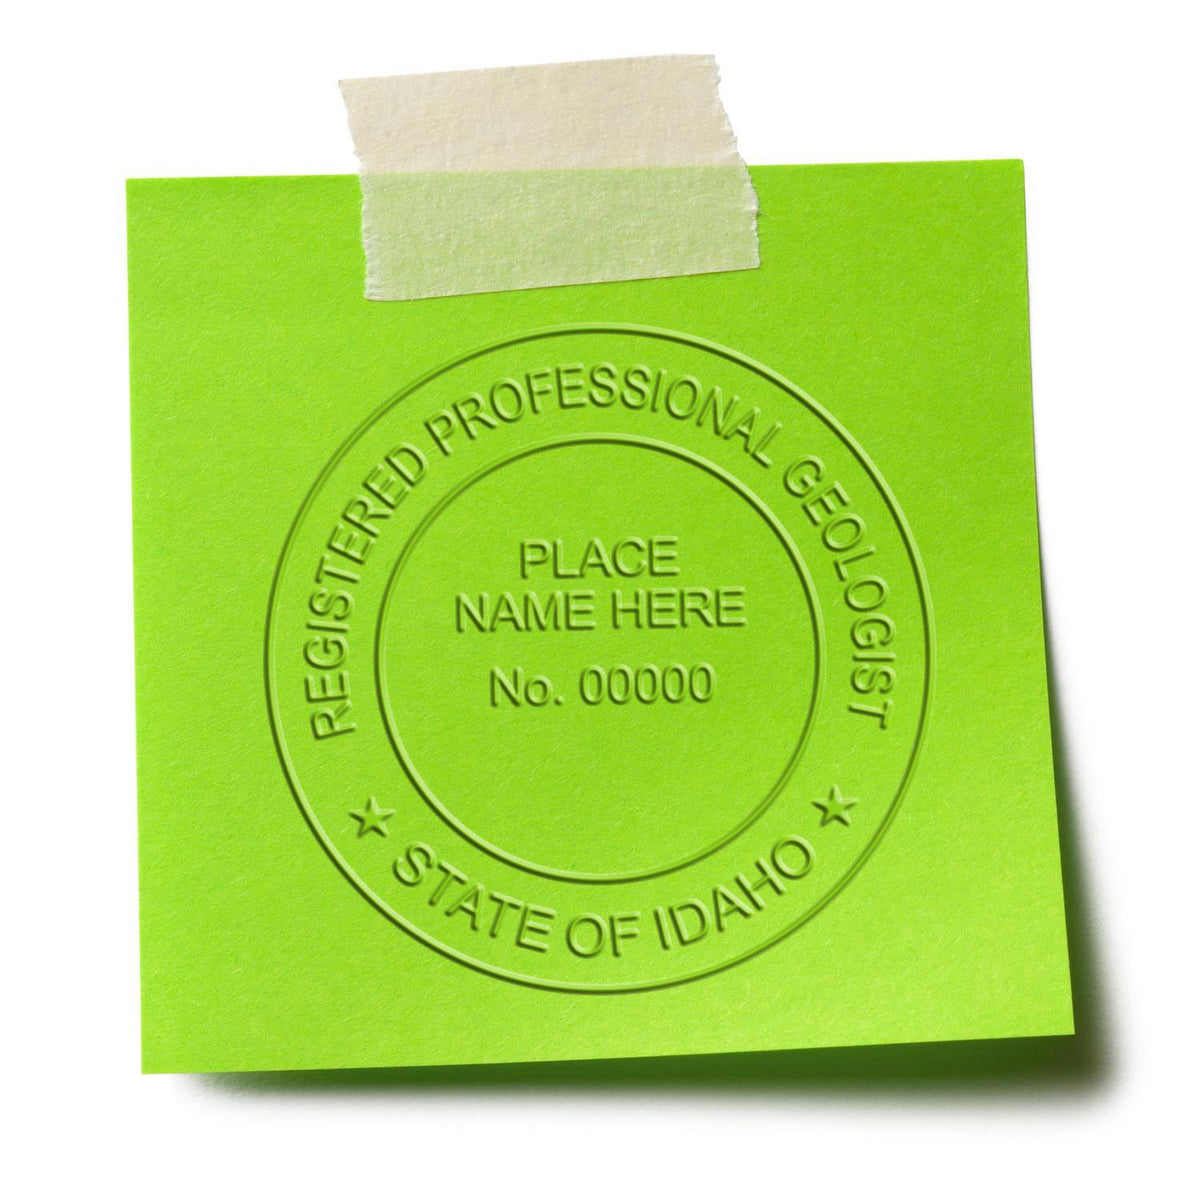 An in use photo of the Gift Idaho Geologist Seal showing a sample imprint on a cardstock